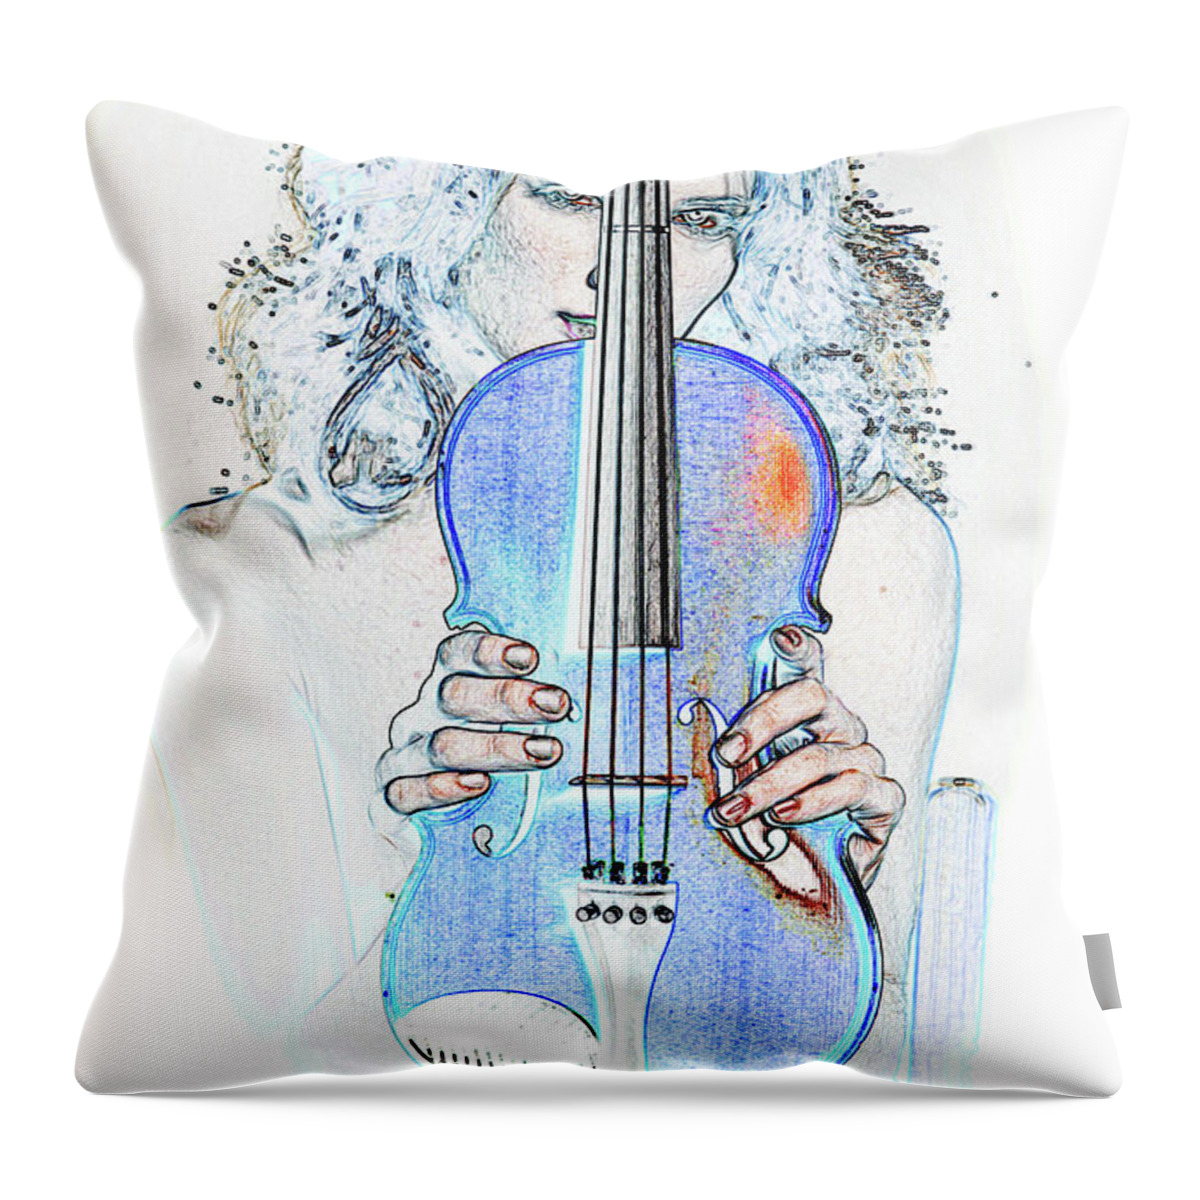 Artsy Throw Pillow featuring the photograph 418.1854 Violin Musician #1 by M K Miller